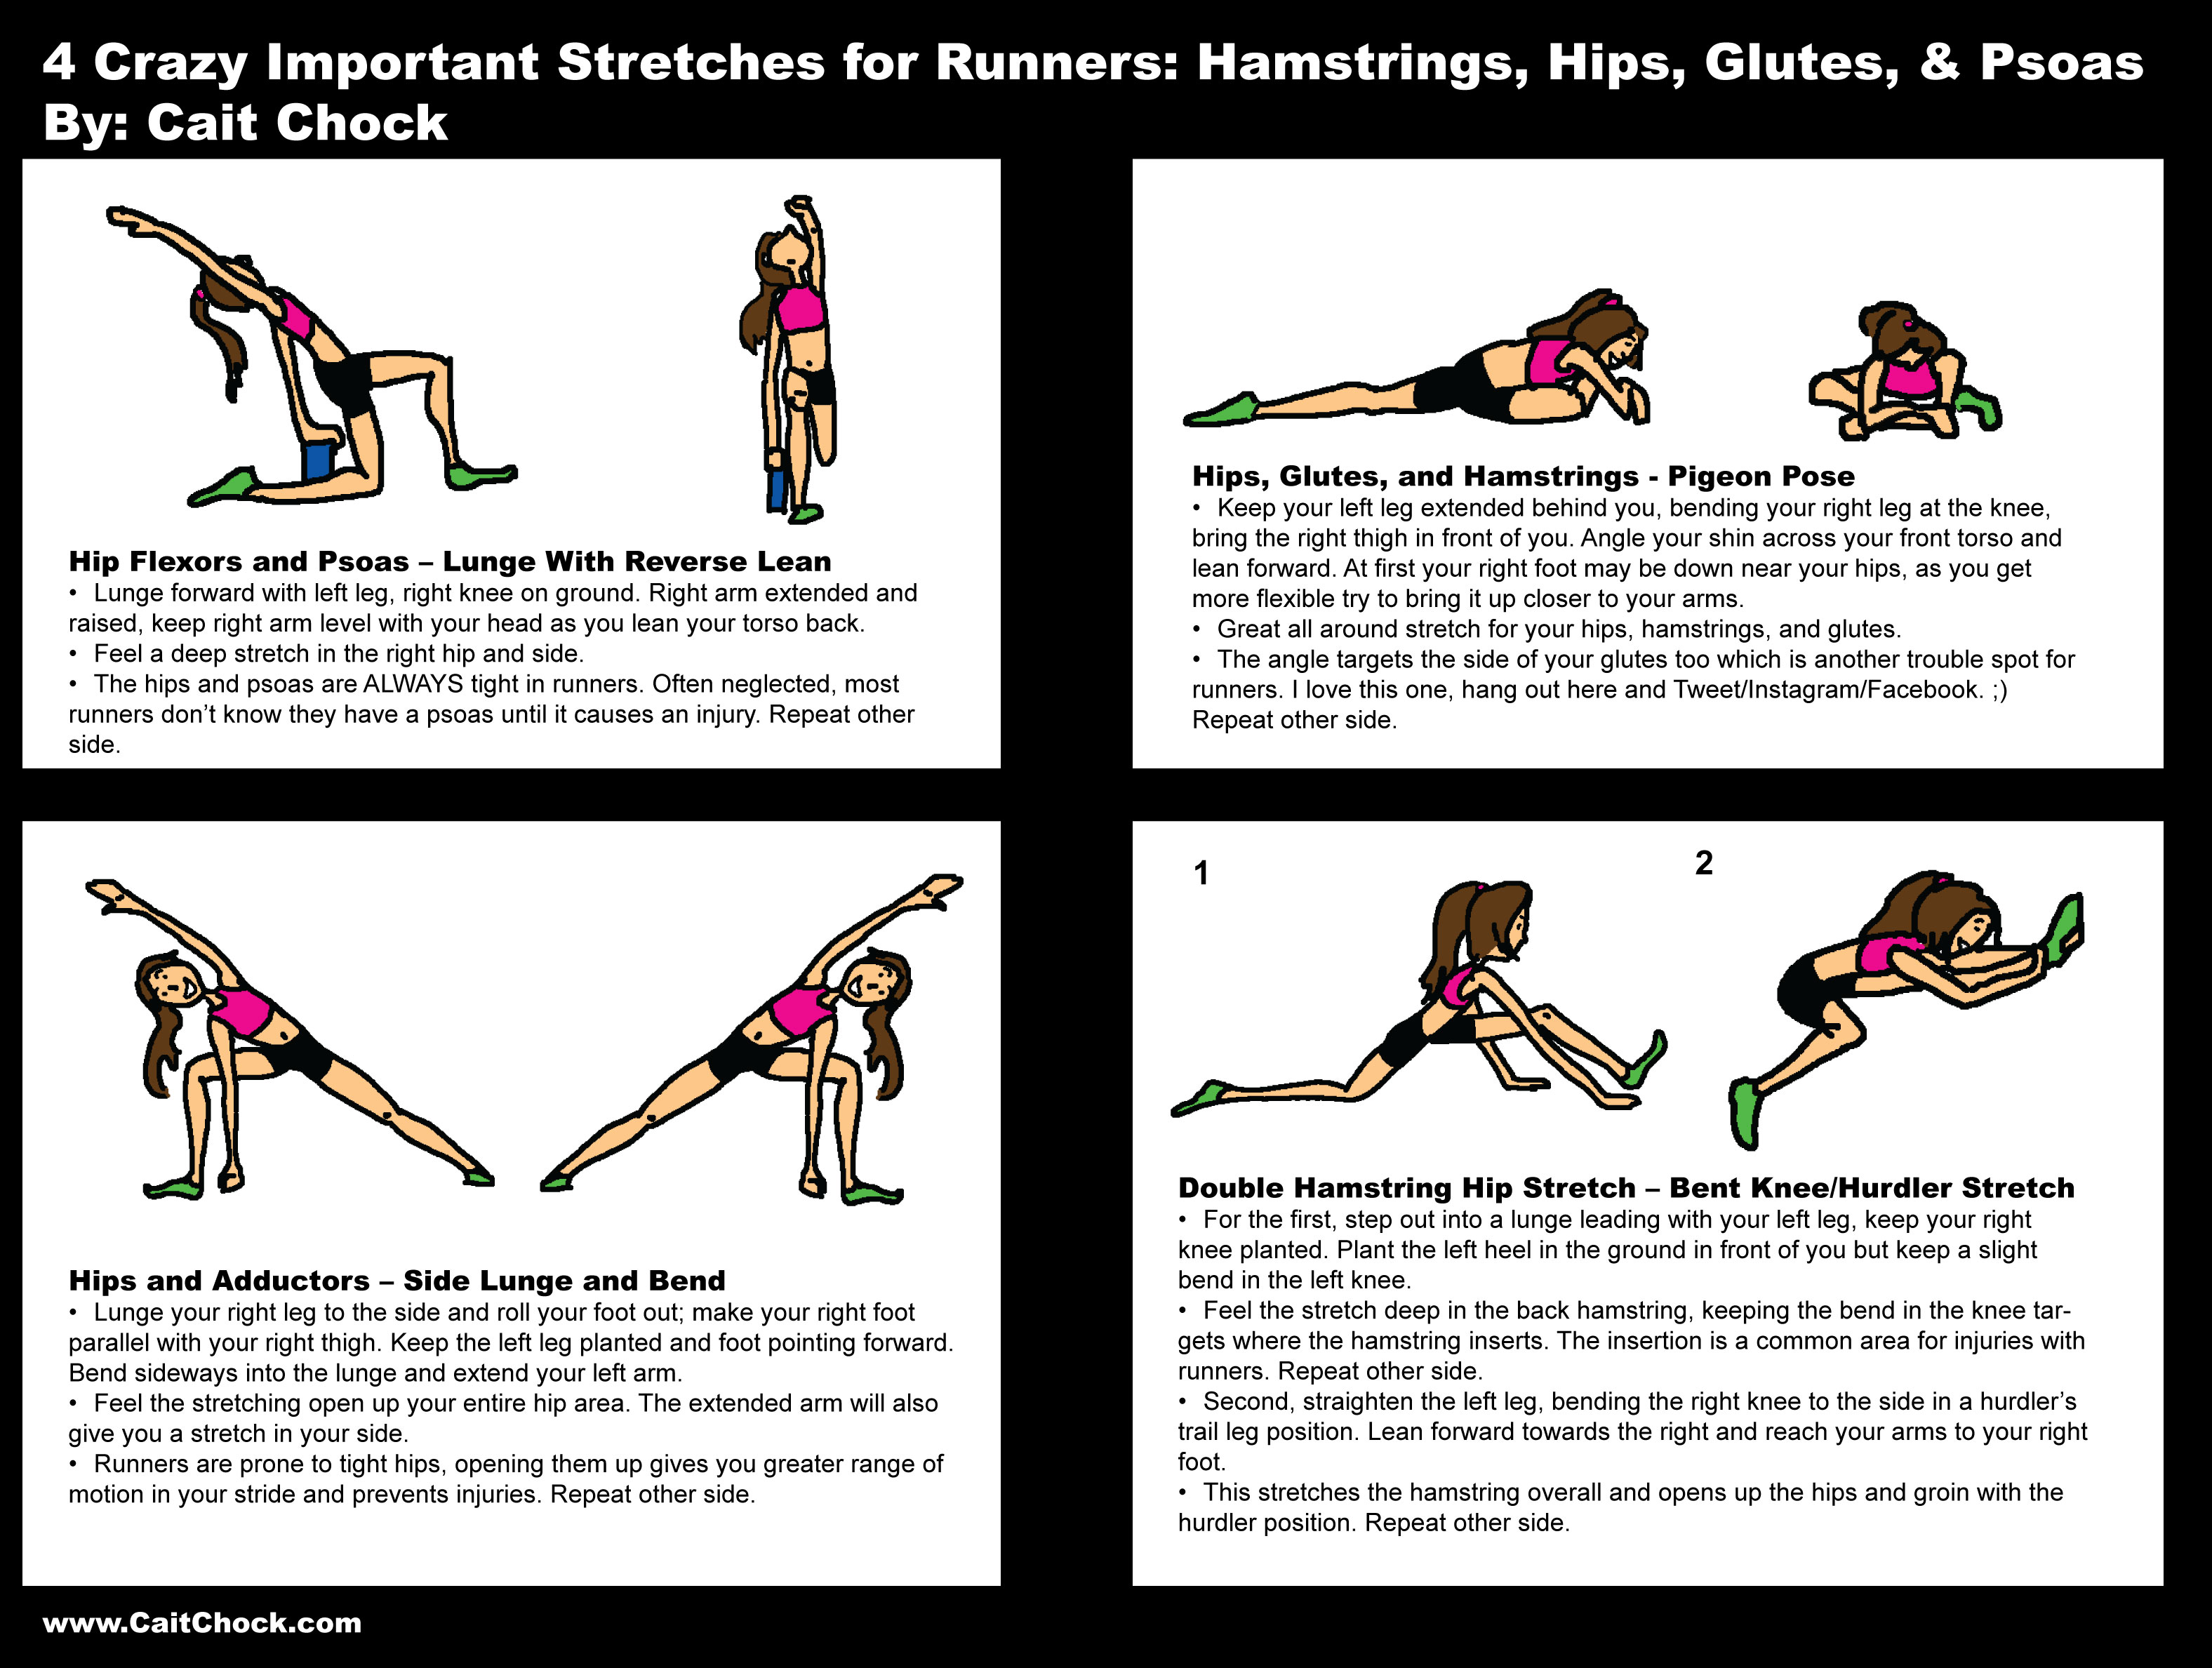 IV. Proper Techniques for Stretching